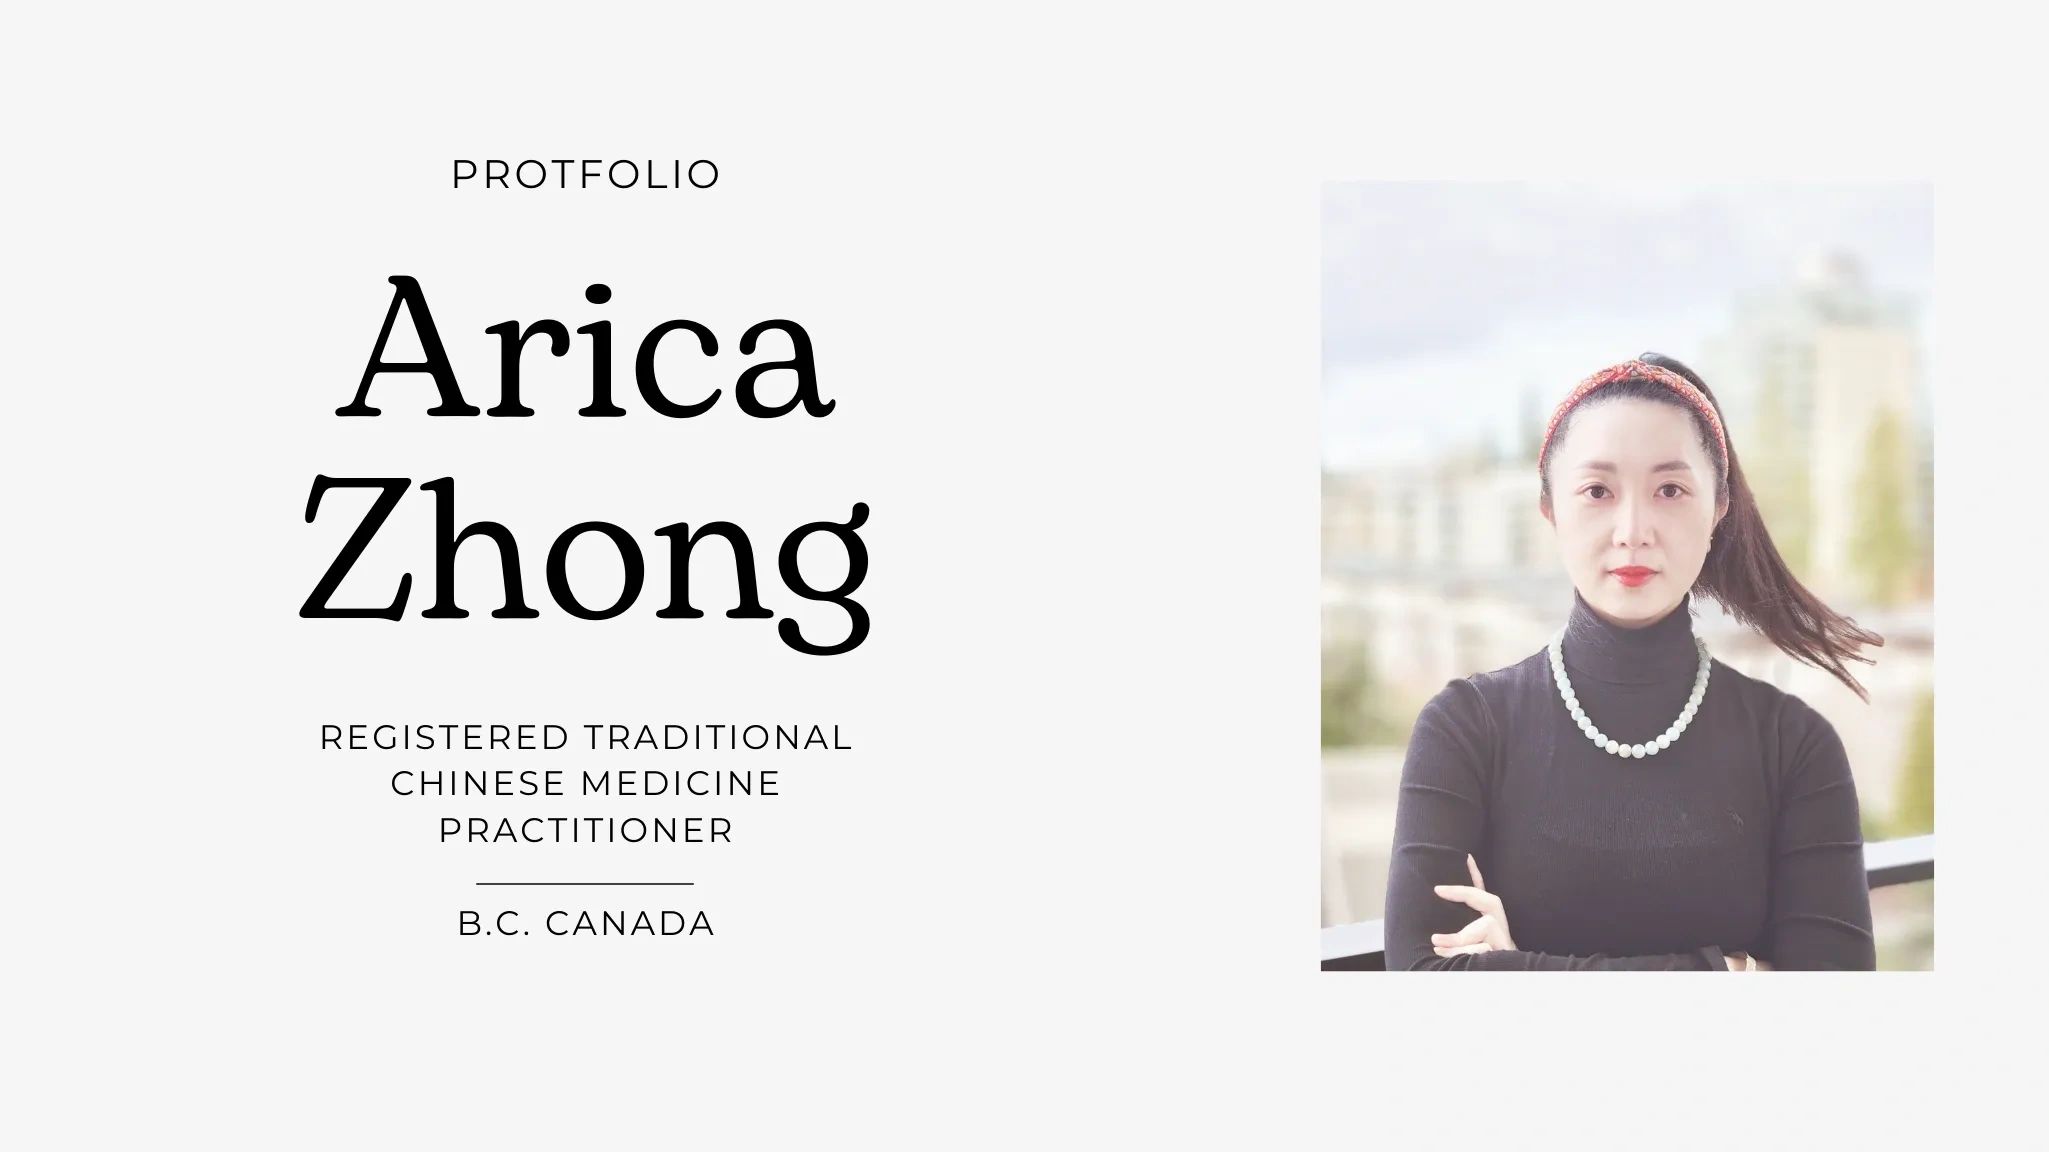 Vancouver Registered Traditional Chinese Medicine Practitioner.Acupuncturist.Sound Healer.Herbalist